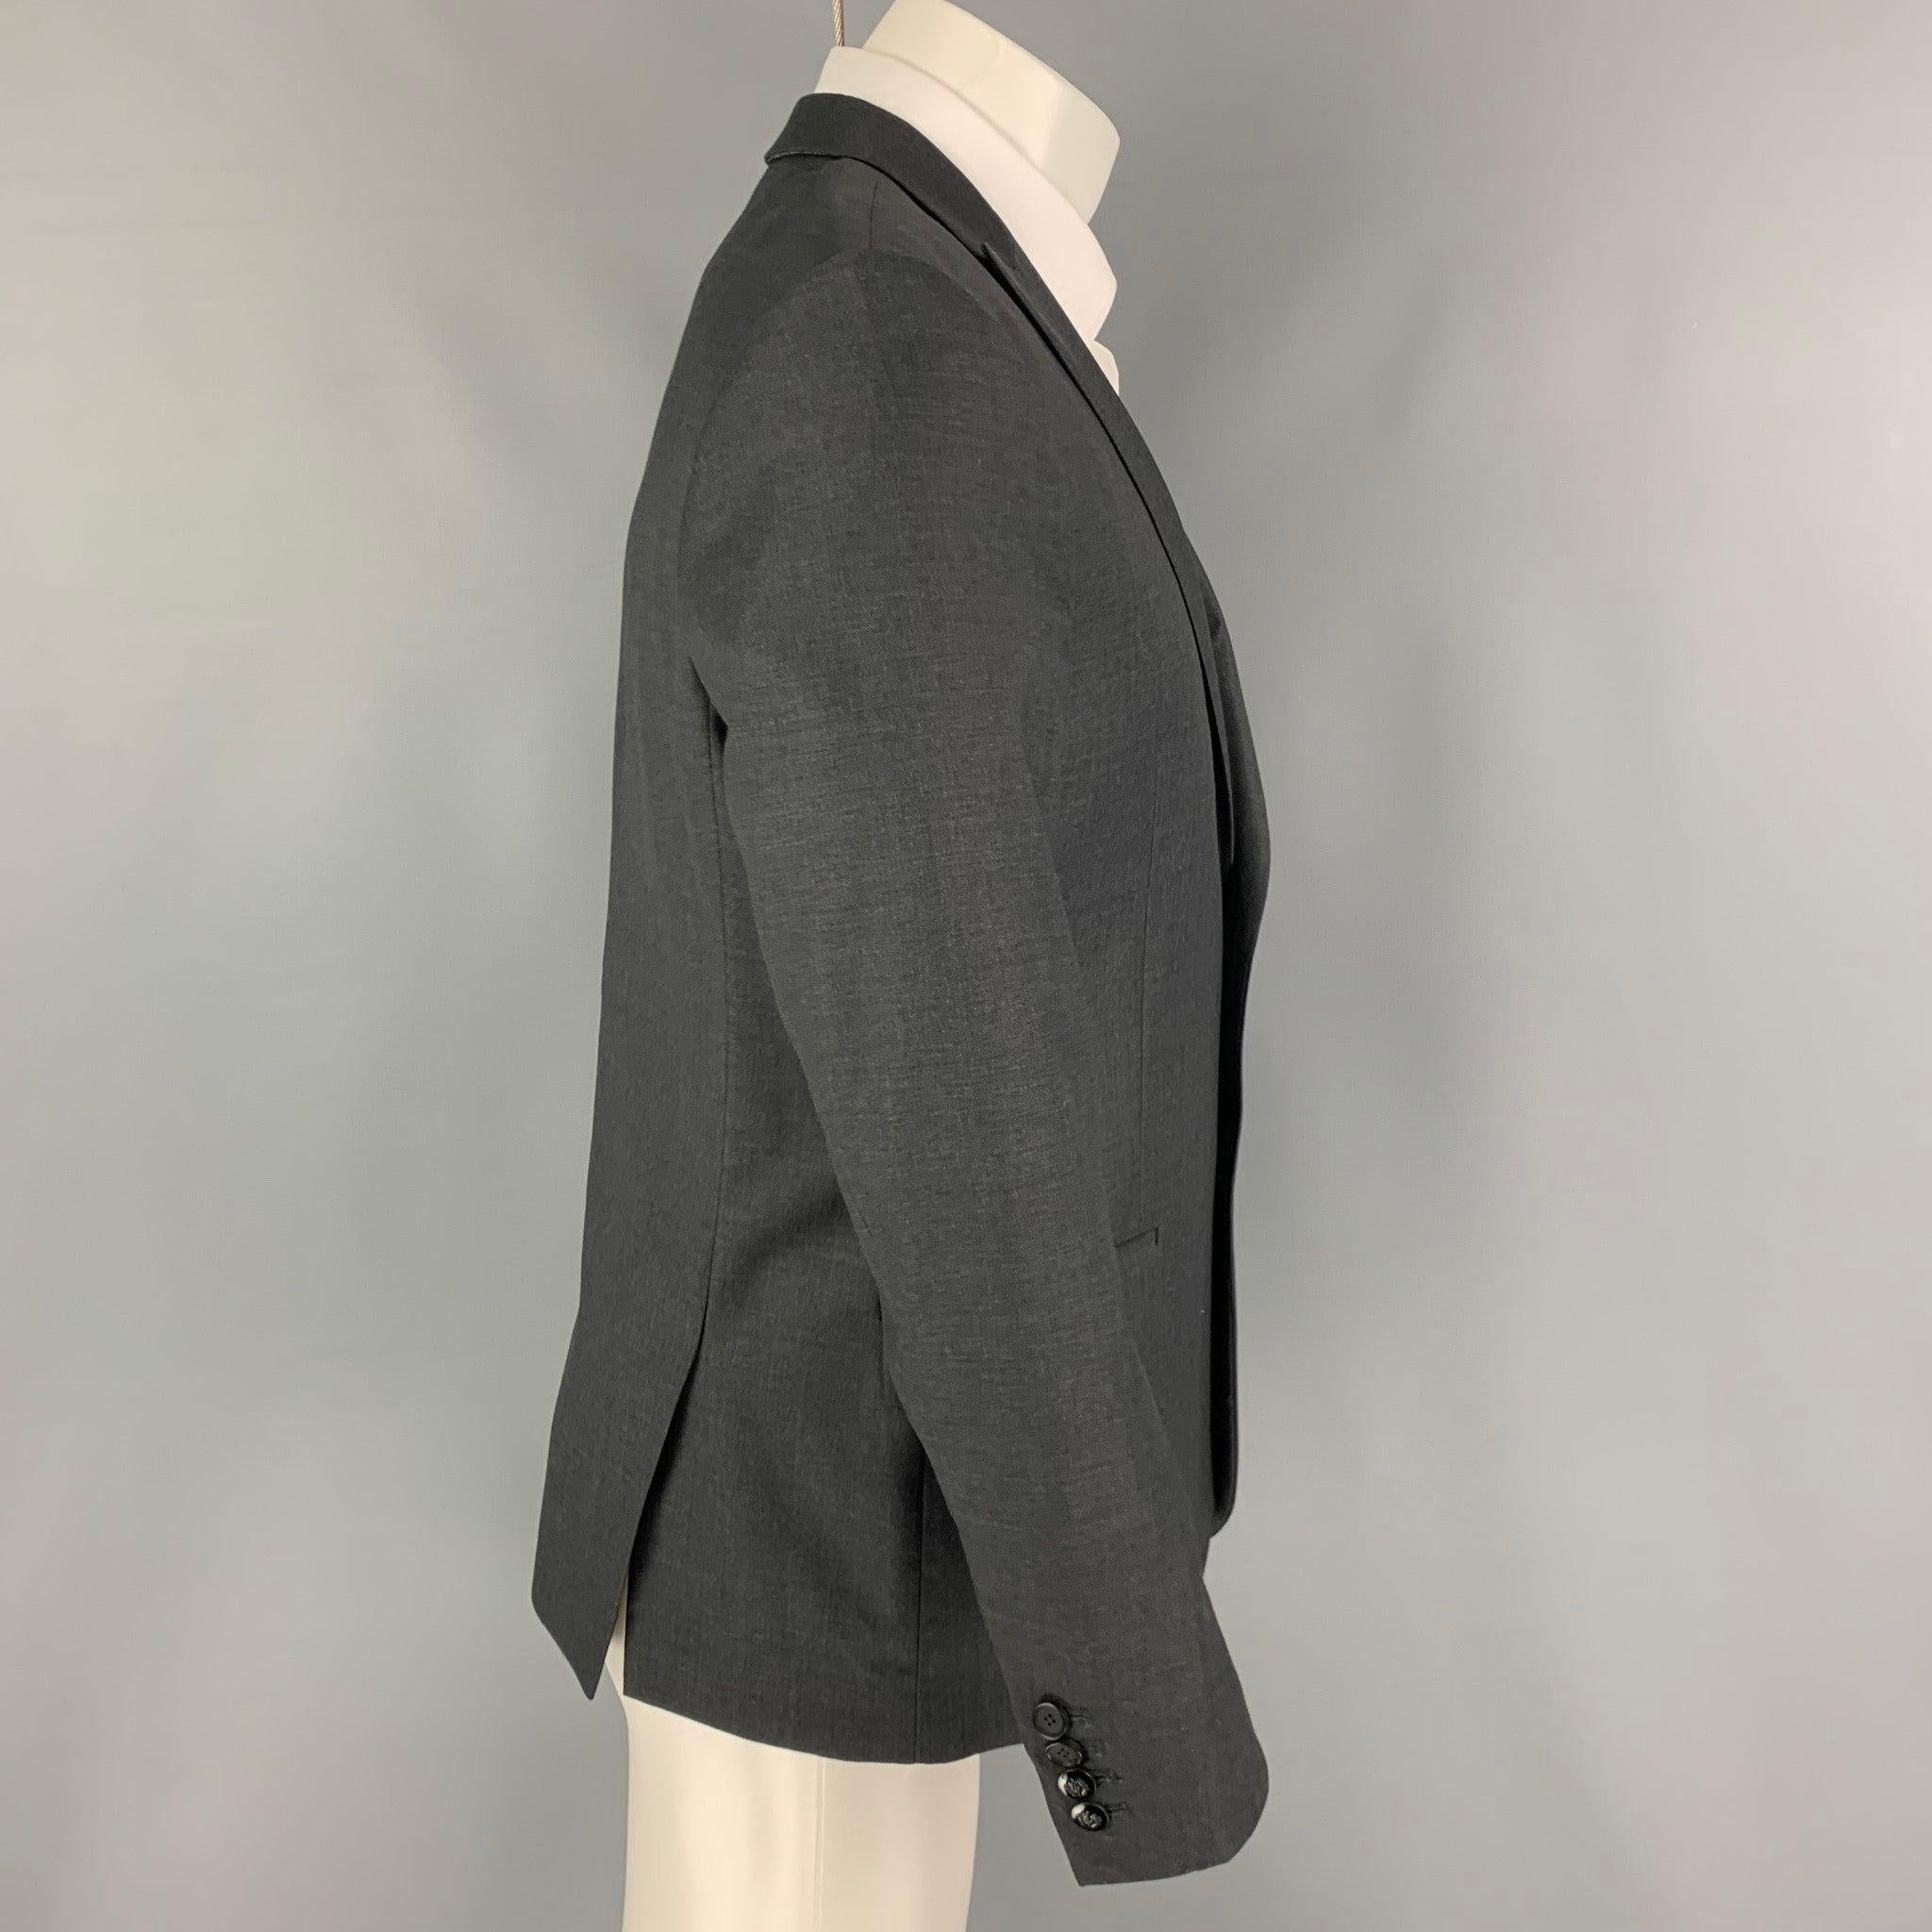 THE KOOPLES sport coat comes in a charcoal wool with a full liner featuring a peak lapel, flap pockets, double back vent, and a double button closure.
Excellent
Pre-Owned Condition. 

Marked:   48 

Measurements: 
 
Shoulder: 18 inches Chest:
38